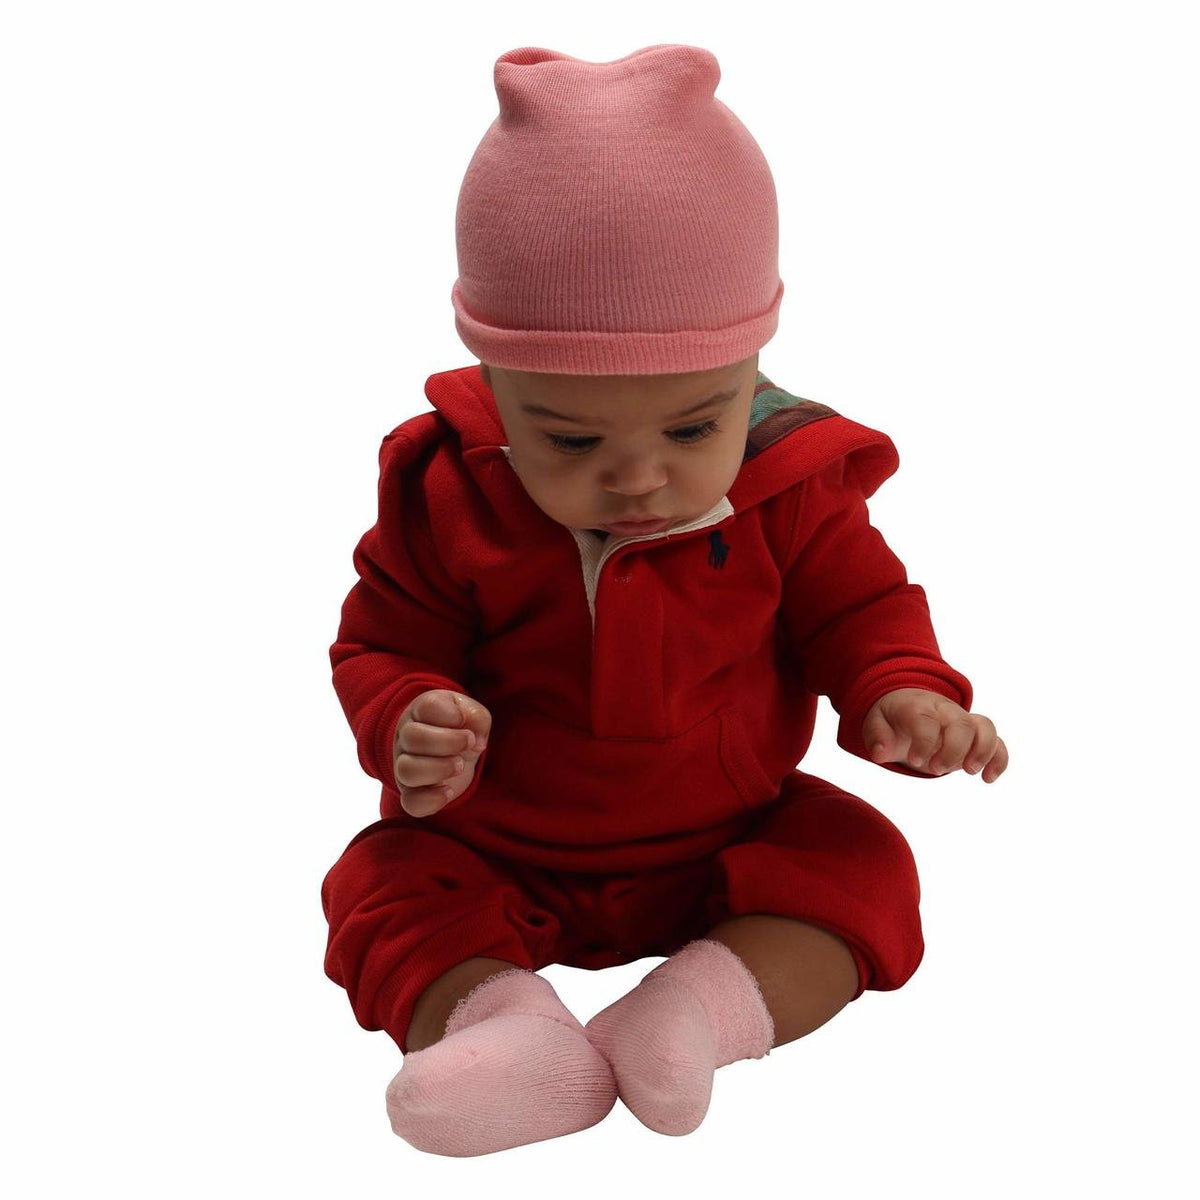 Comfort Warming Infant Newborn Baby Booties and Thermal Hat Set - Mars Med Supply